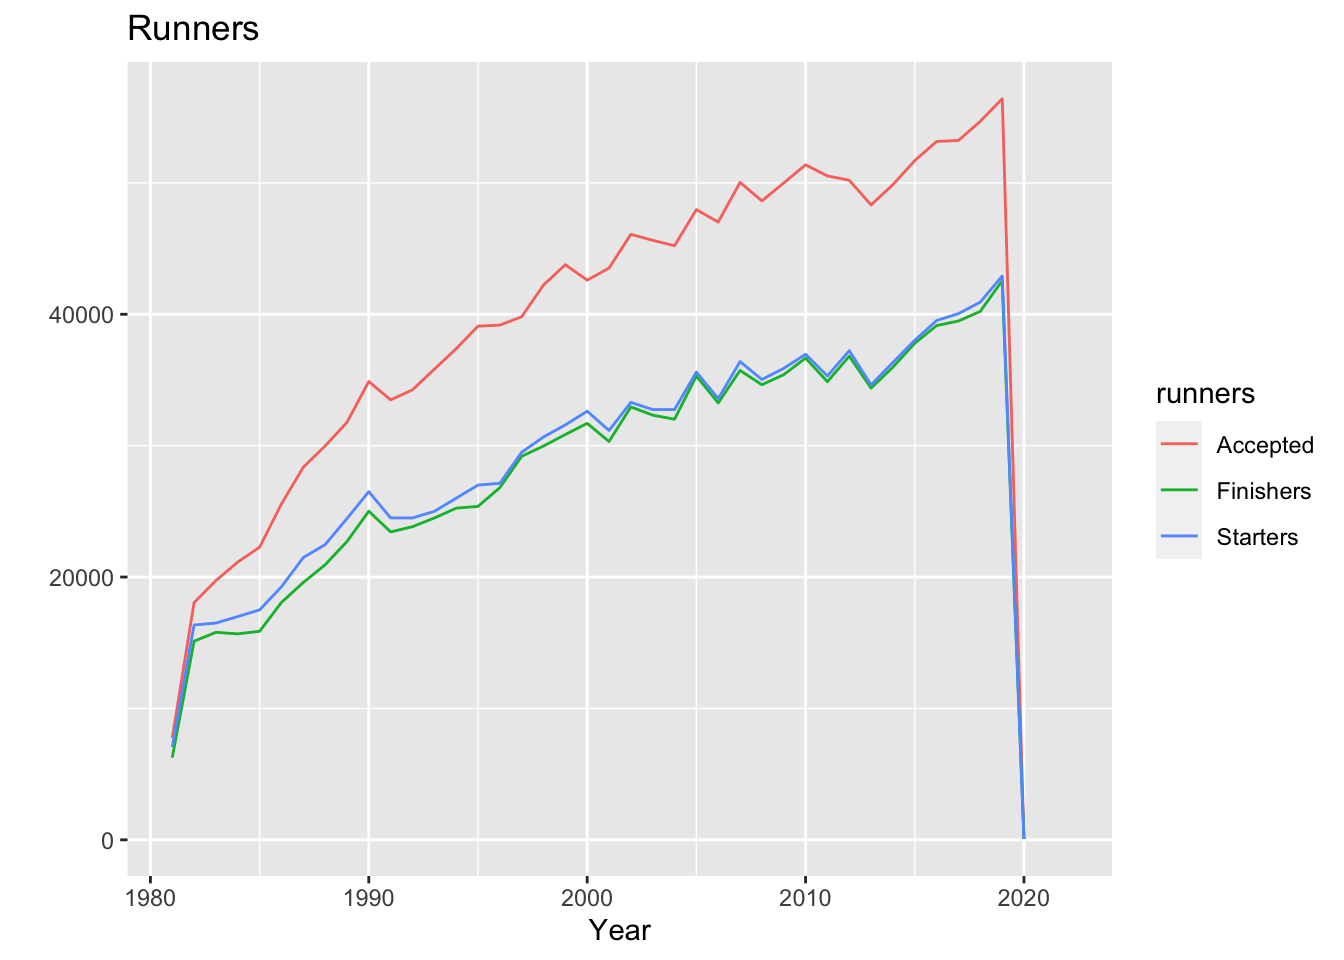 Line plot with year on the x-axis and count on the y-axis.  Three lines are given, one for each of number of applicants, number of starters, and number of finishers to the London Marathon.  All three lines increase quite a bit over the range of data which is between 1980 and 2020.  In 2020 all three lines sharply drop because of the COVID-19 pandemic and only 77 people being allowed to compete.